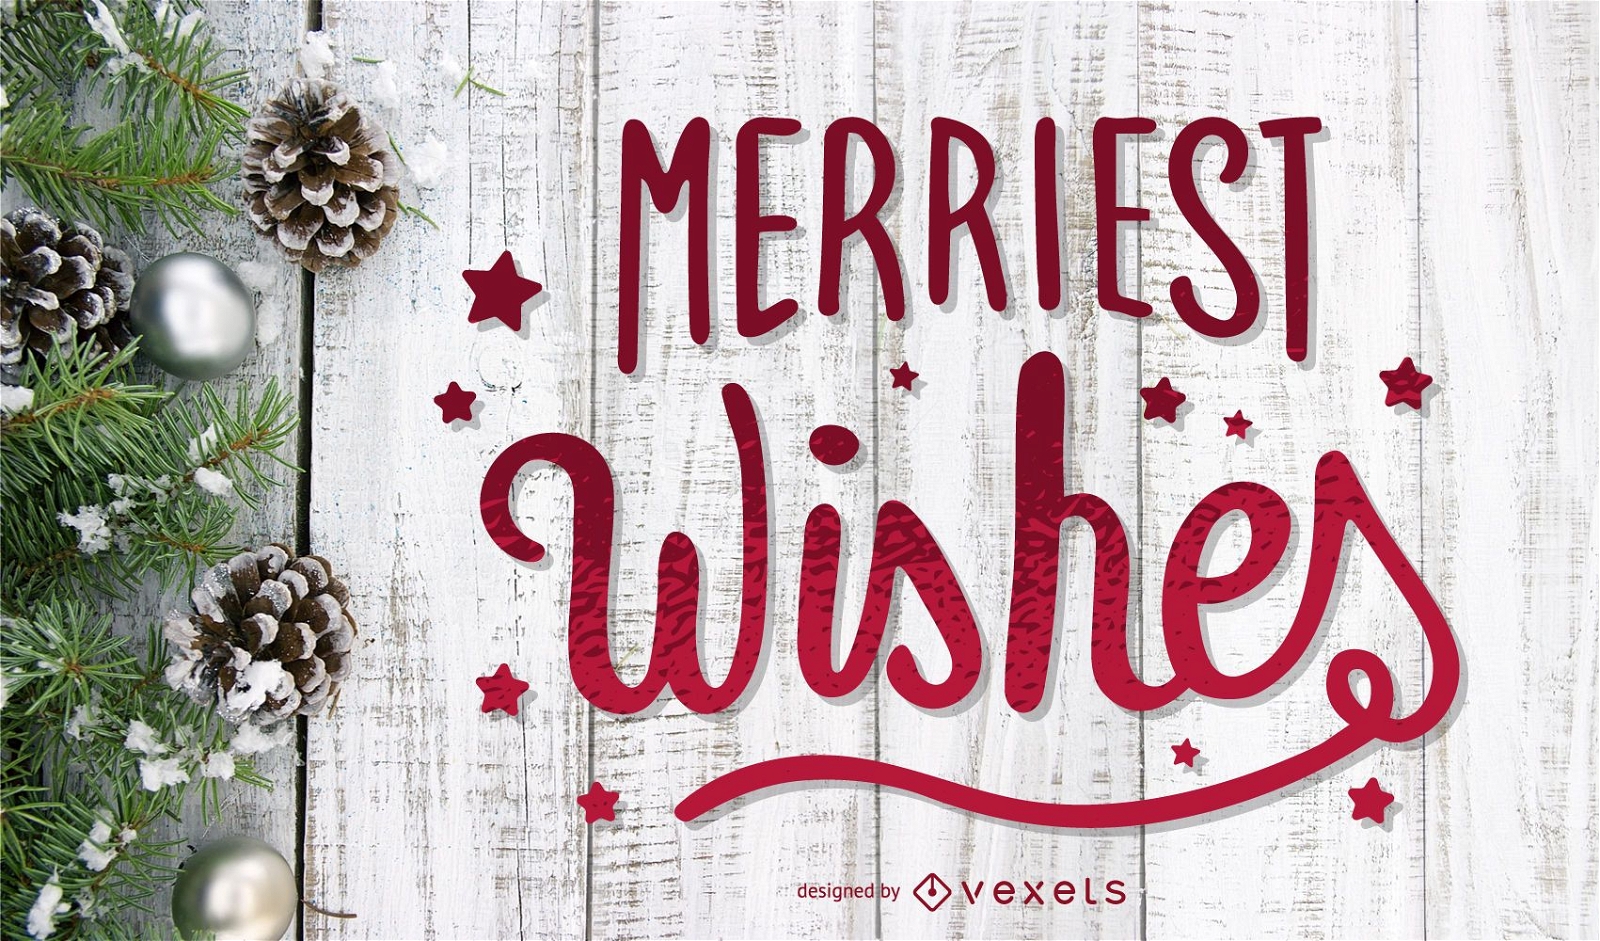 Merriest Wishes Lettering Design